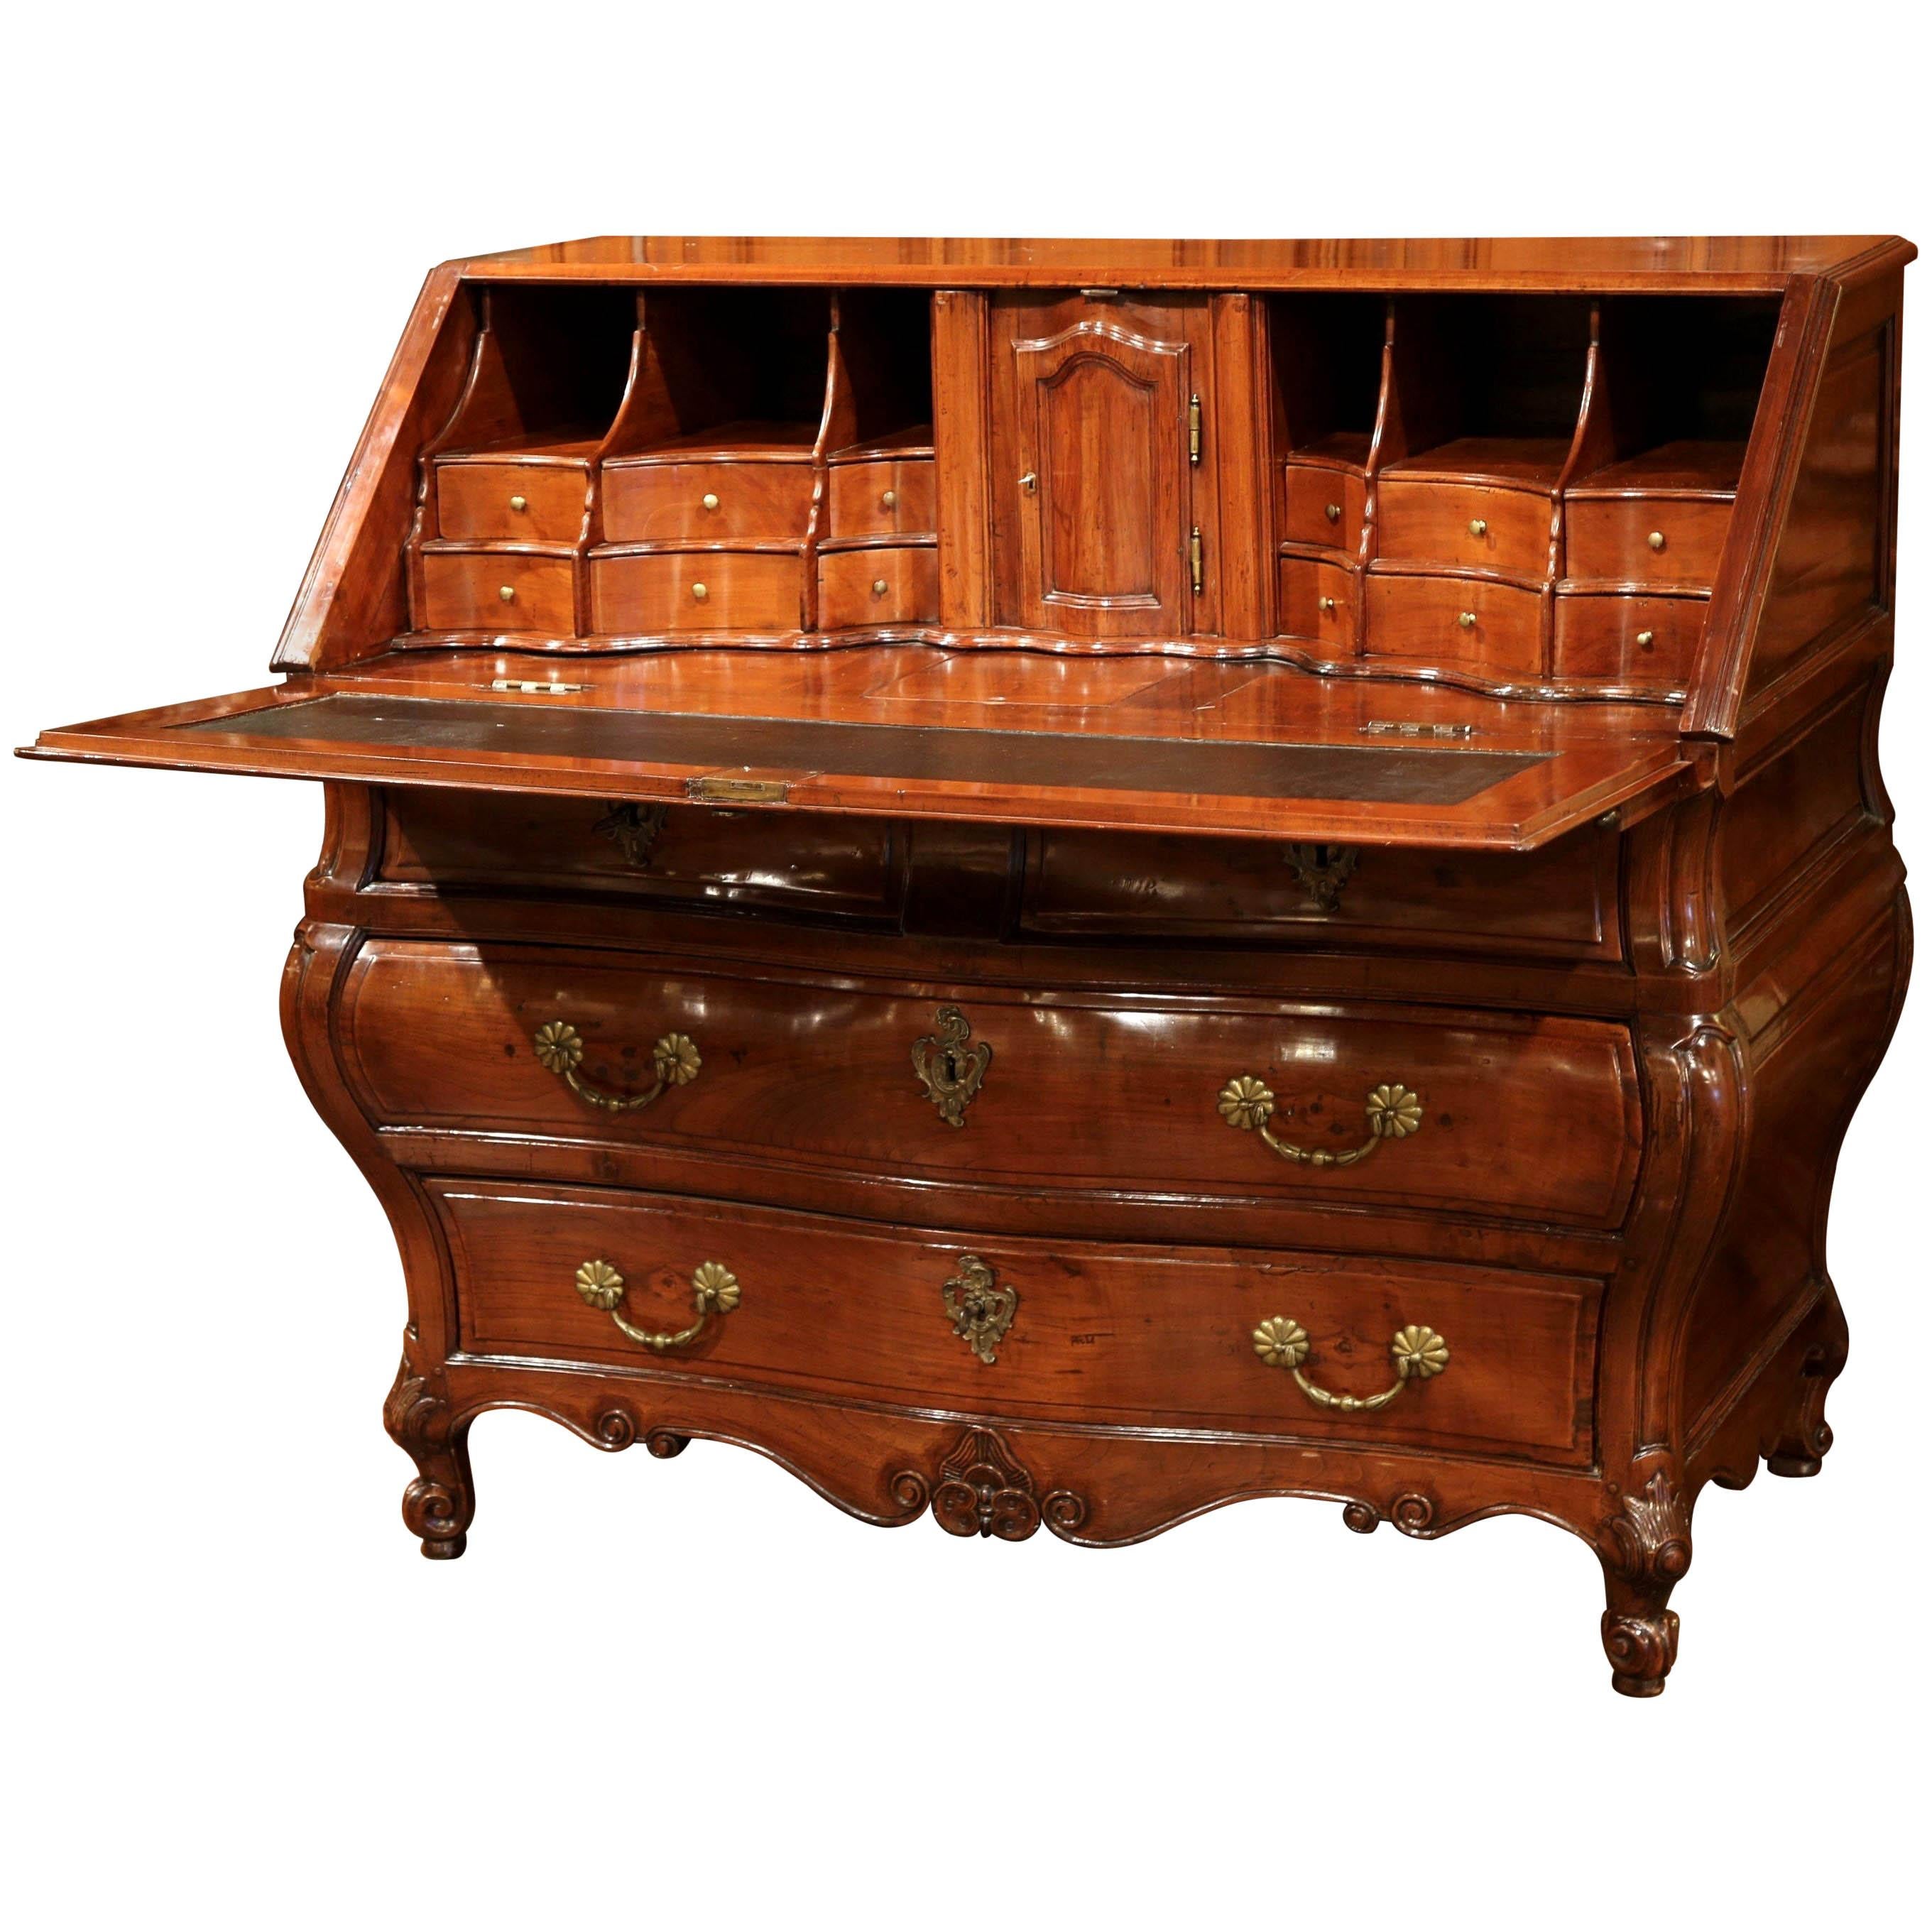 18th Century French Louis XV Carved Bombe Cherry Desk Secretary from Bordeaux